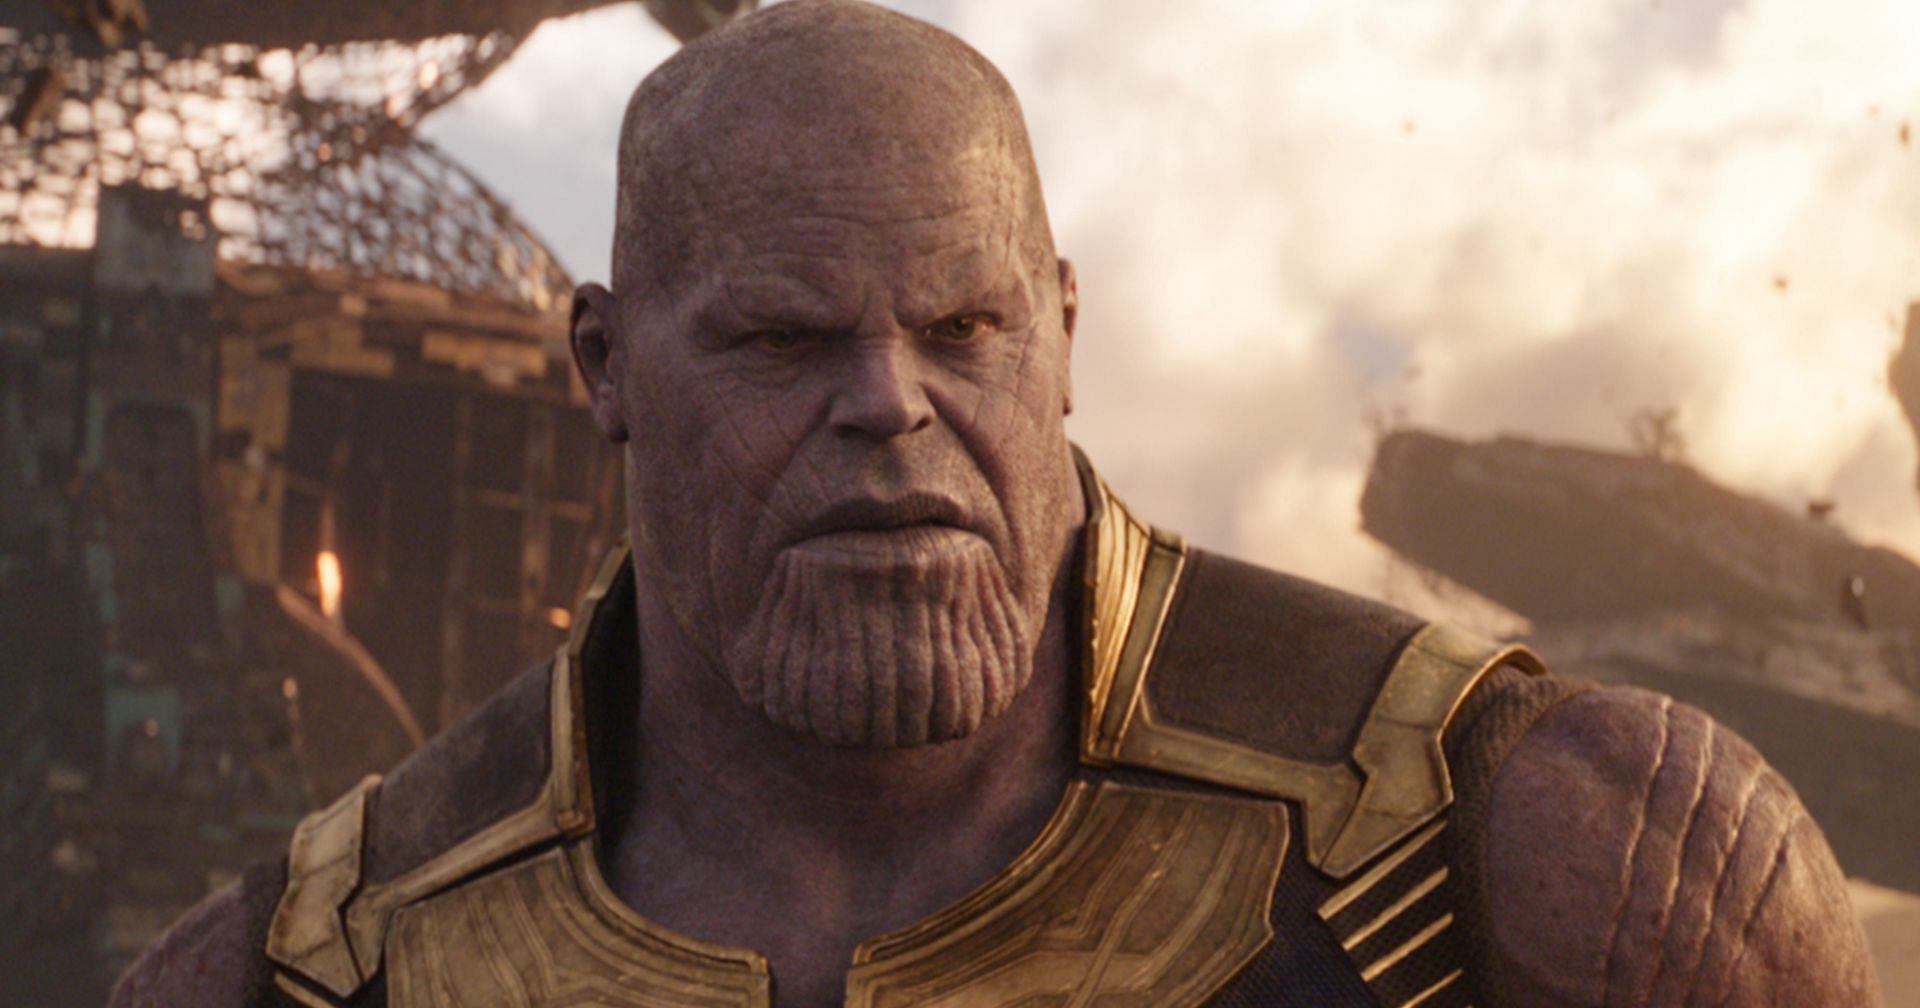 Thanos as he appears in the Marvel Cinematic Universe (Image via Marvel Studios)